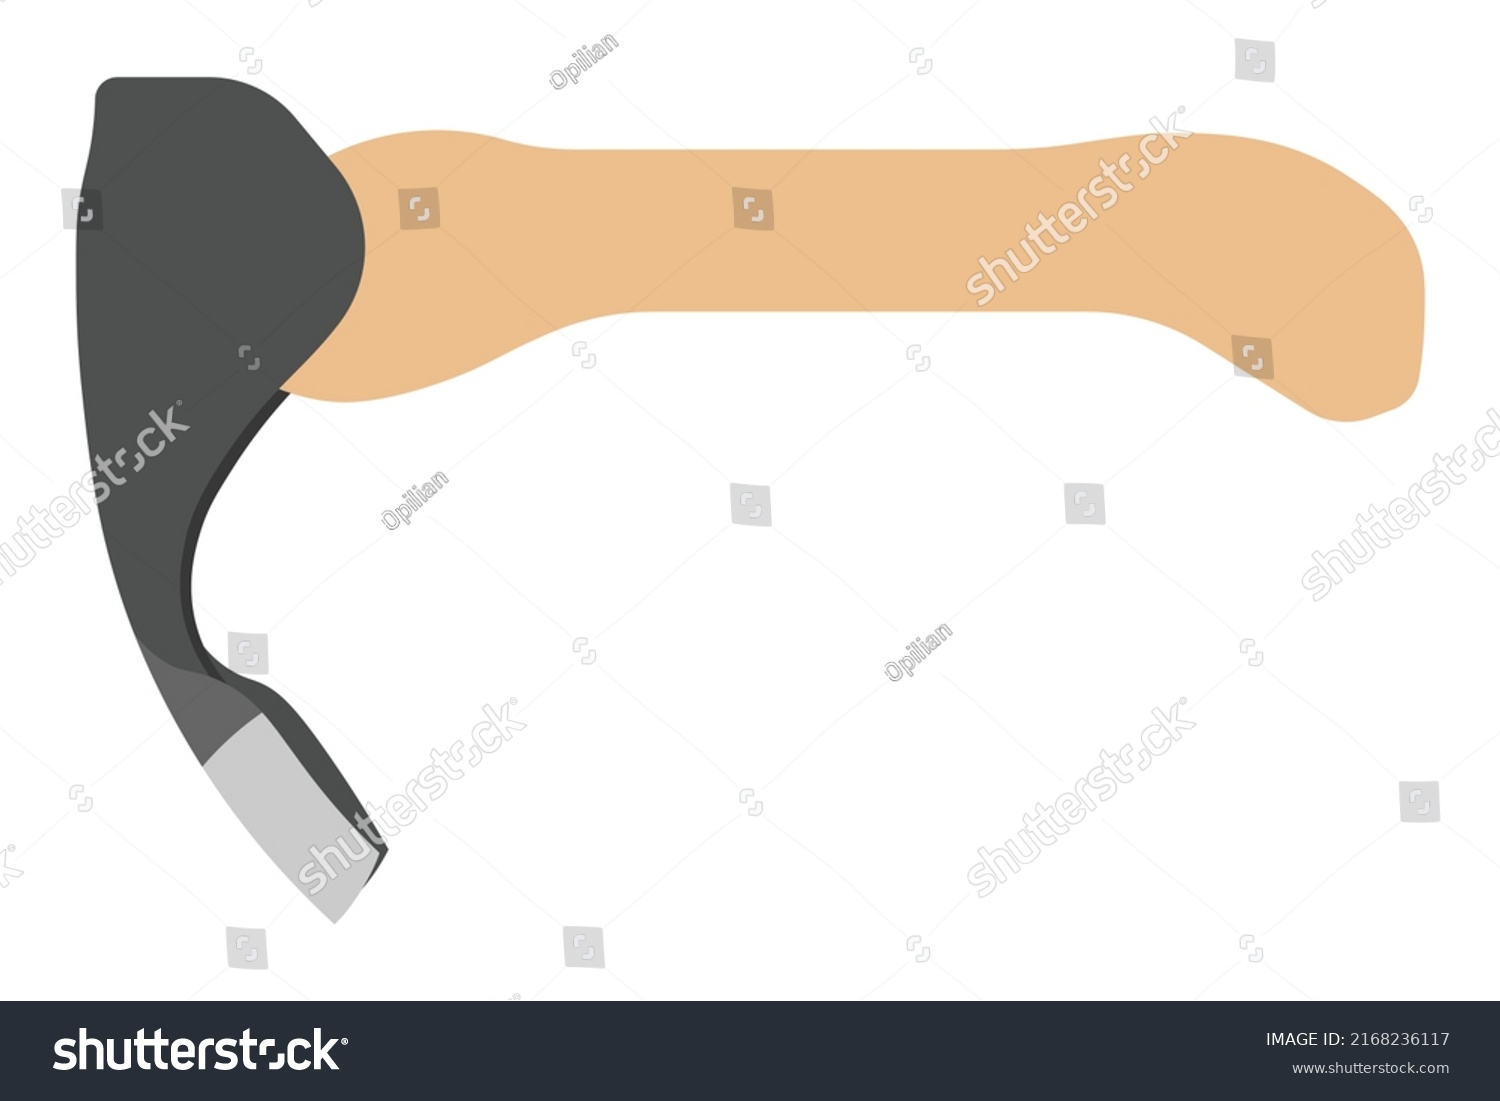 SVG of Adze isolated vector on white background. This cutting tool is used for removing heavy waste, leveling, shaping, or trimming the surfaces of timber. svg